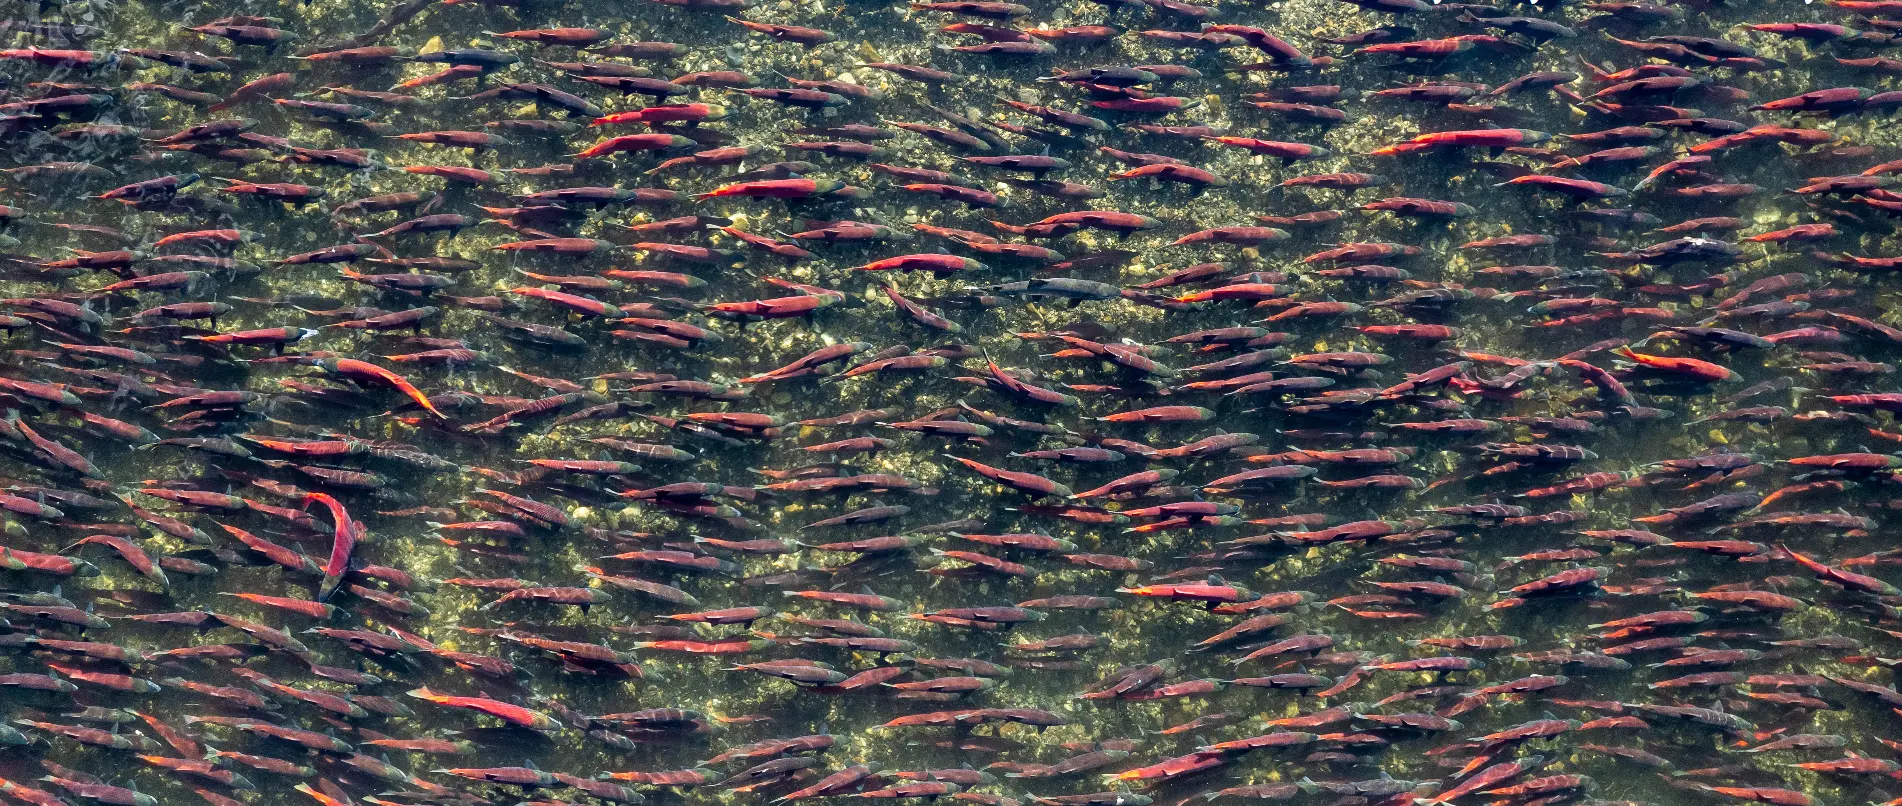 A bird's eye view of a crystal clear creek full of hundreds of salmon. The brilliant red and maroon-colored fish are all swimming in the same direction.